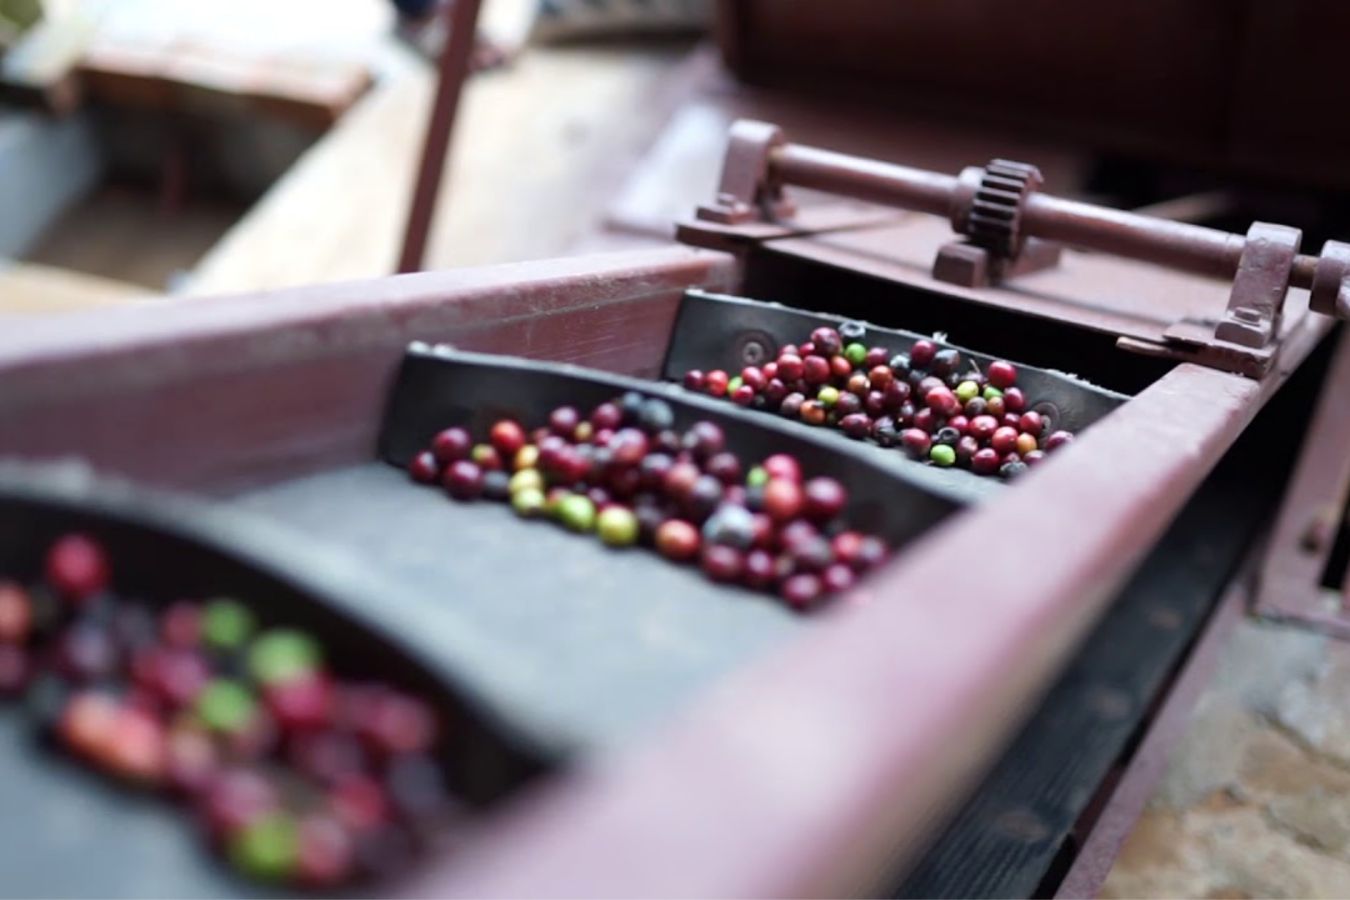 Techniques Of Harvesting And Sorting Green Coffee